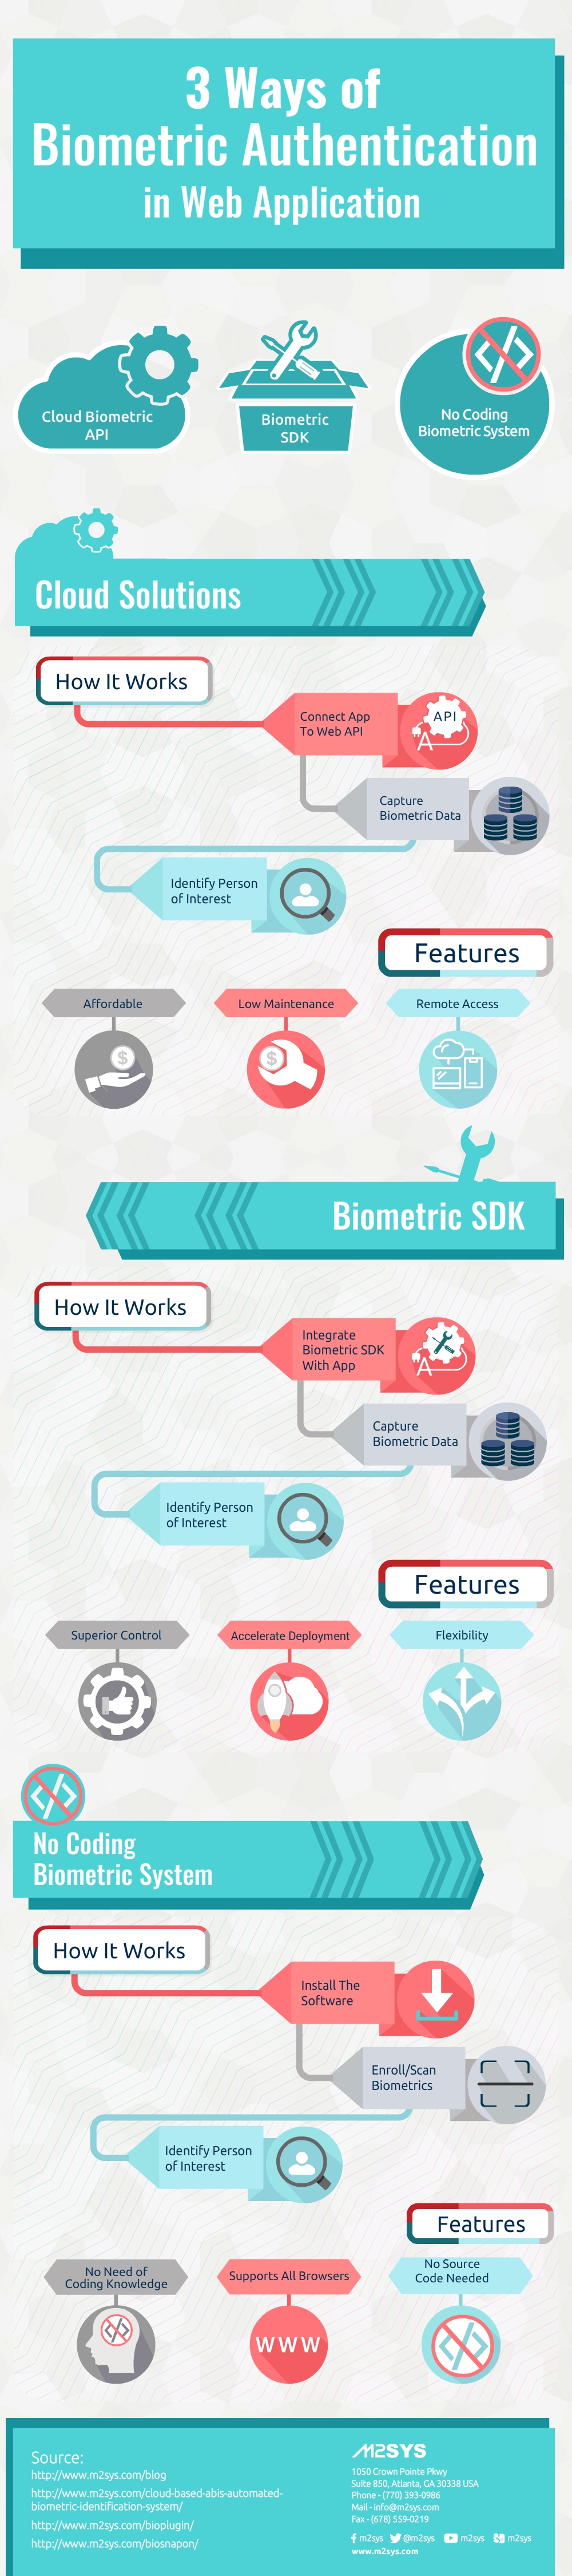 3-ways-of-biometric-authentication-in-web-application